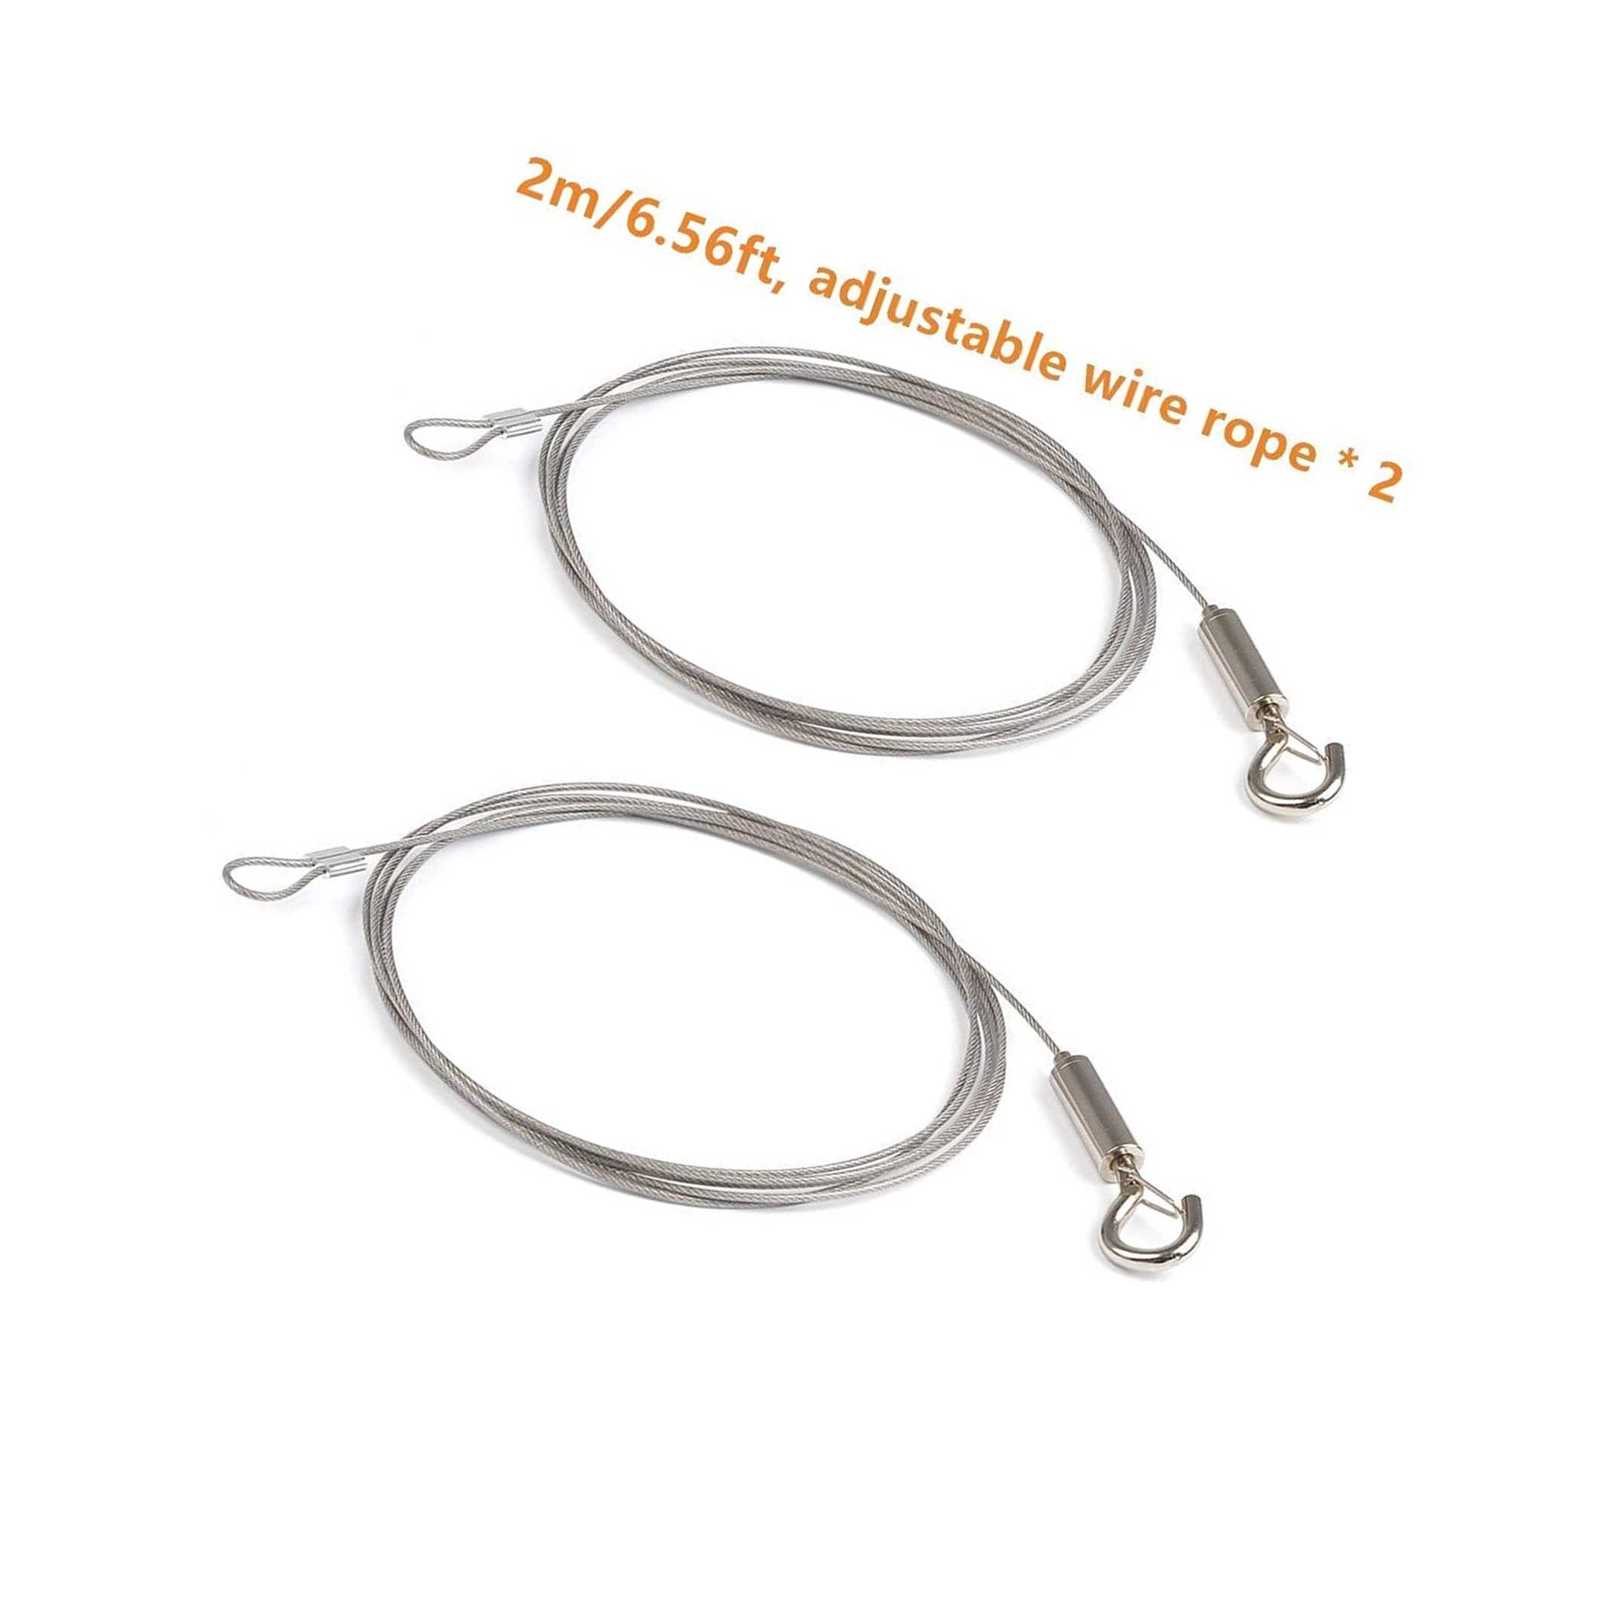 2Pcs Adjustable Picture Hanging Wire Kit 2M X 1.5Mm Heavy Duty R Hanging Wire